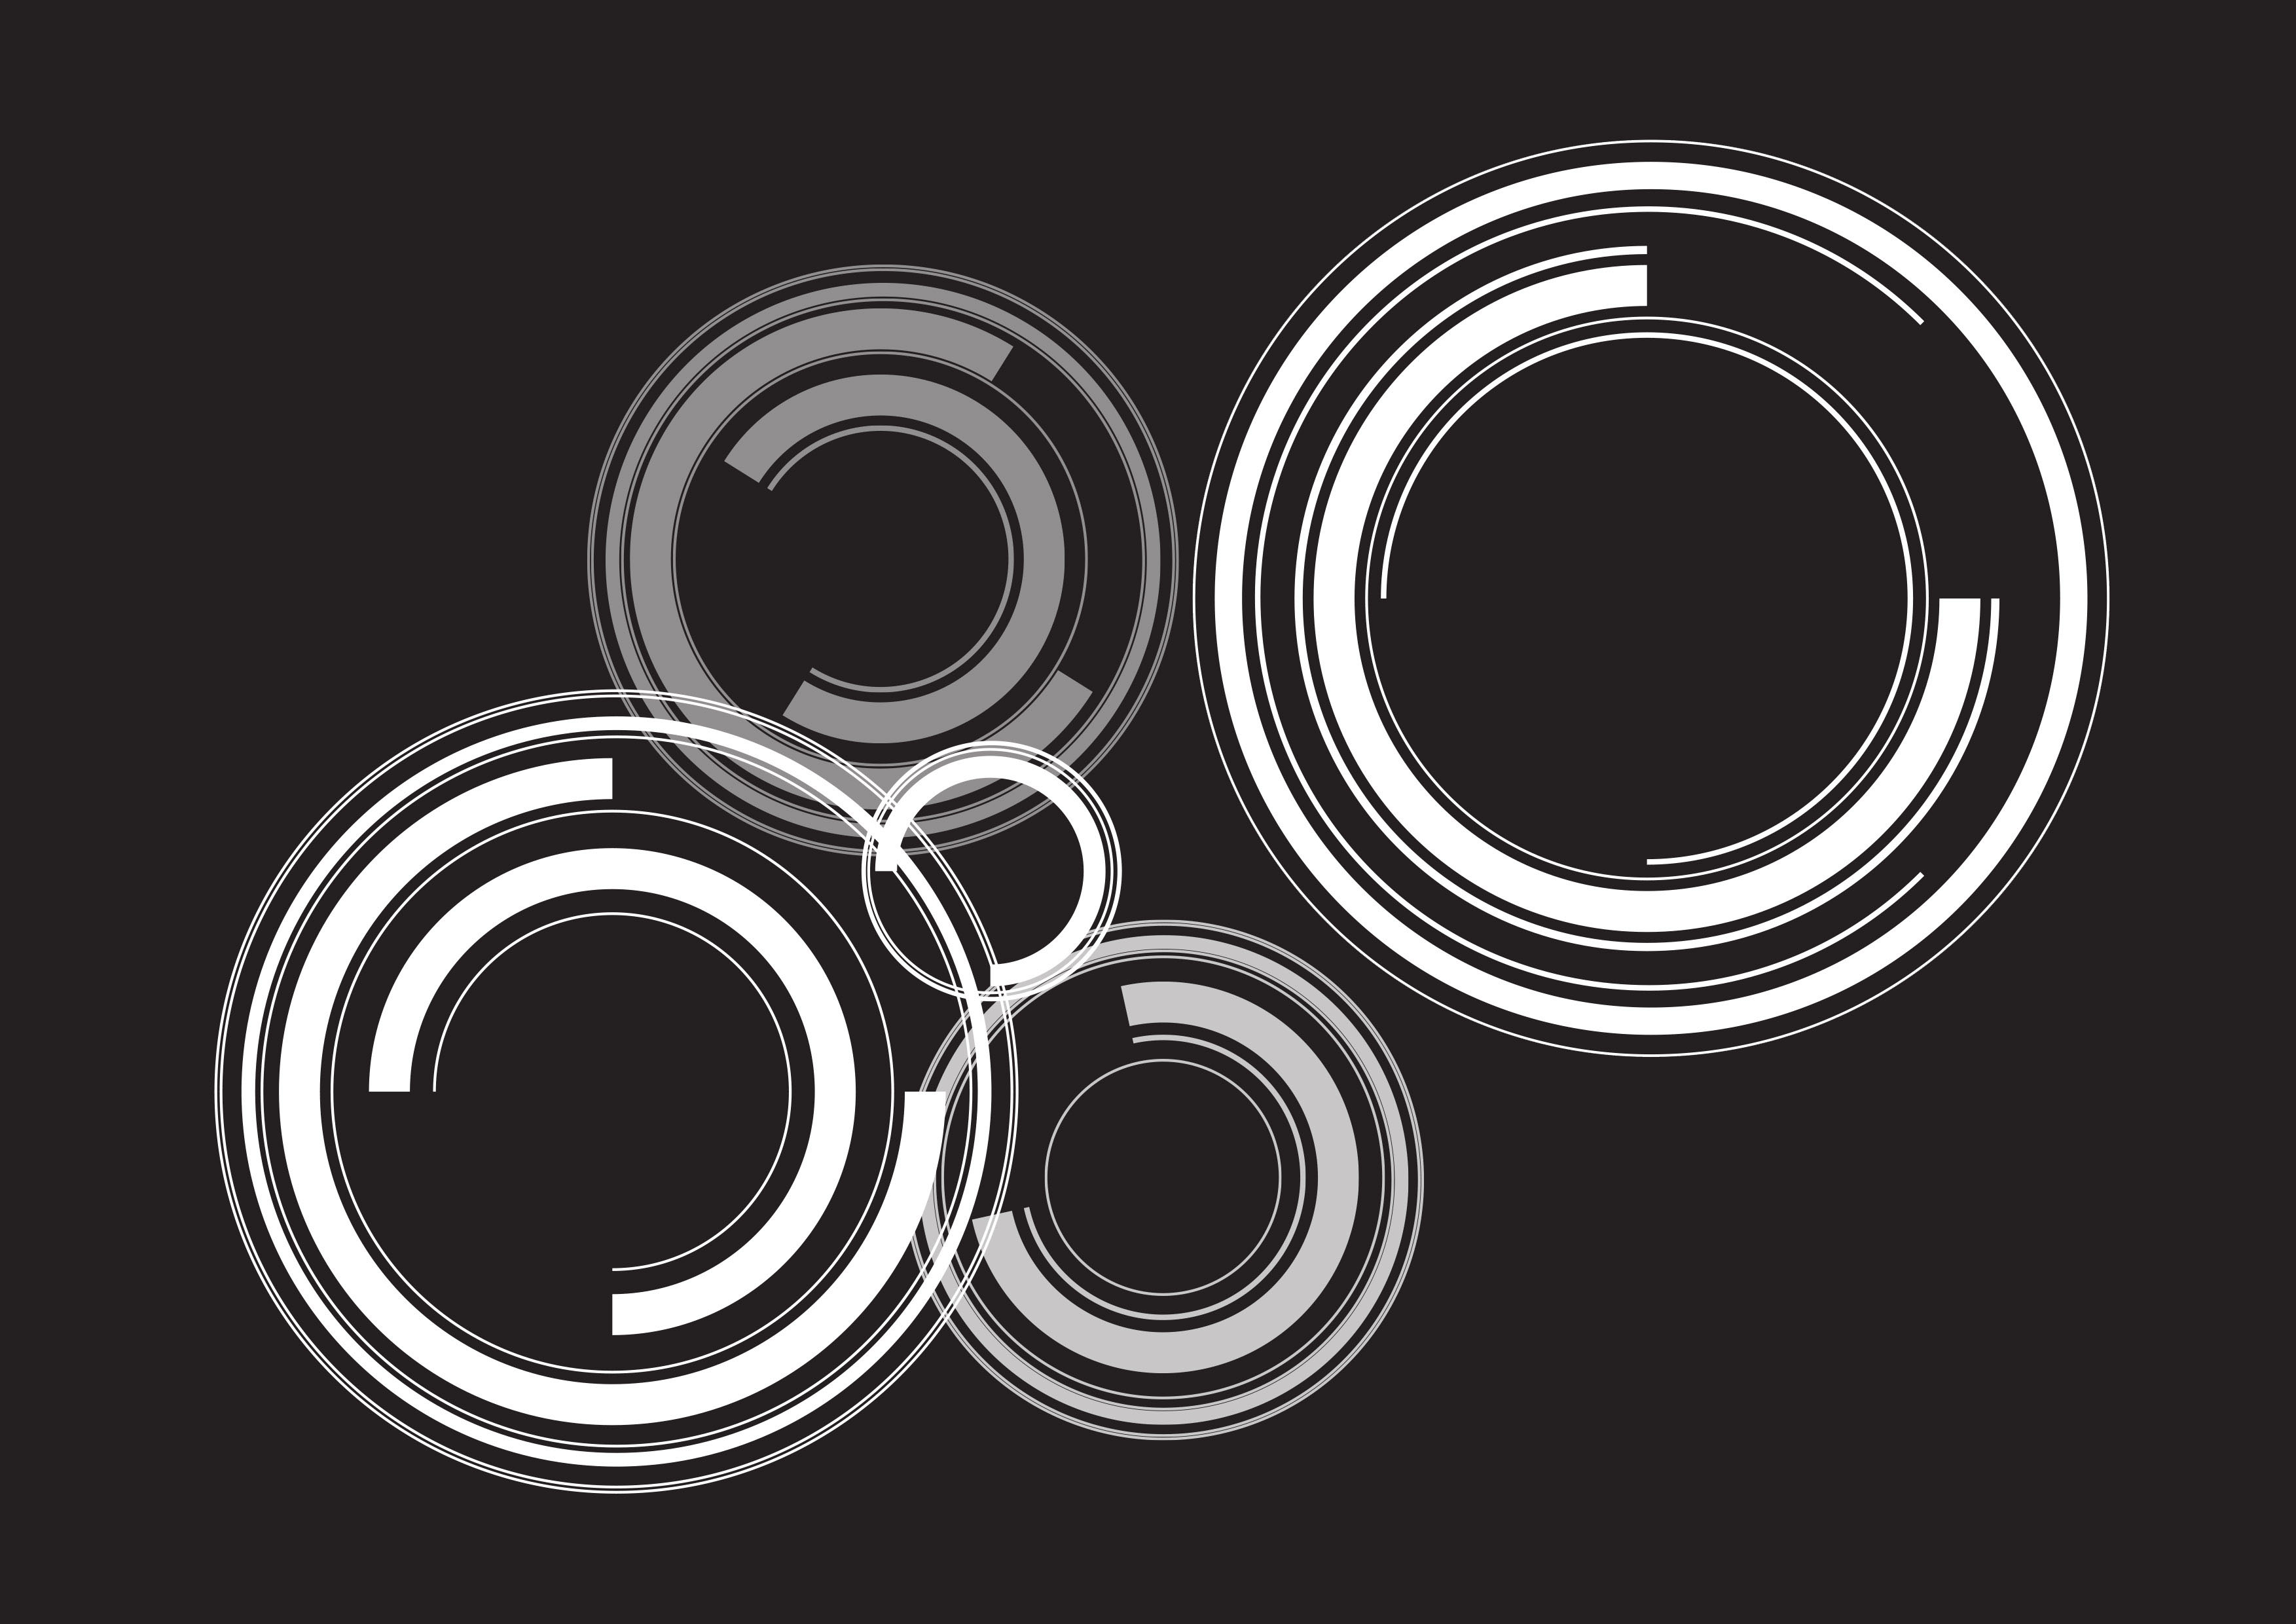 White and grey circles arranged in an abstract manner over a near-black background